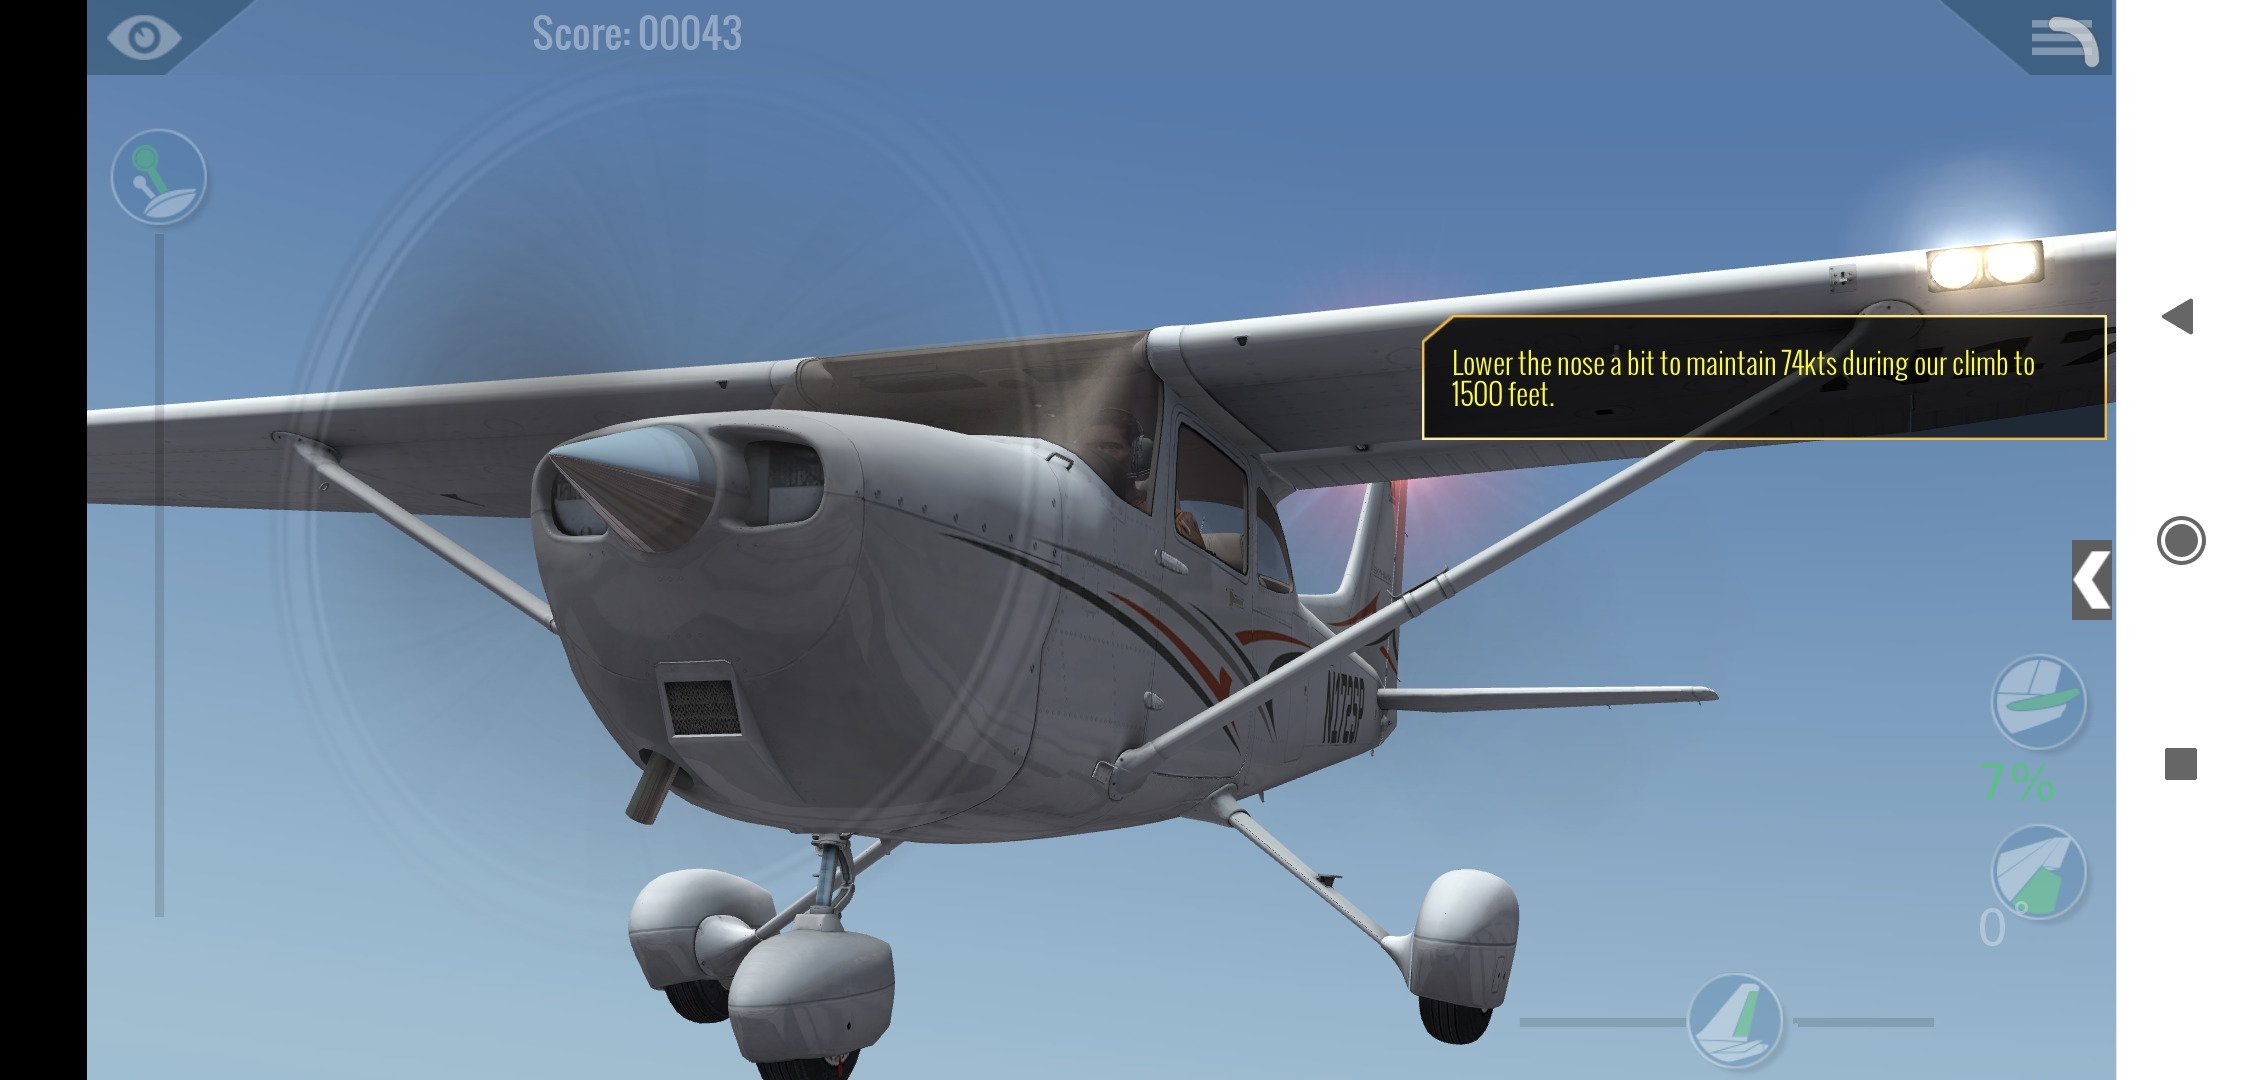 how to install x plane 11 aircraft